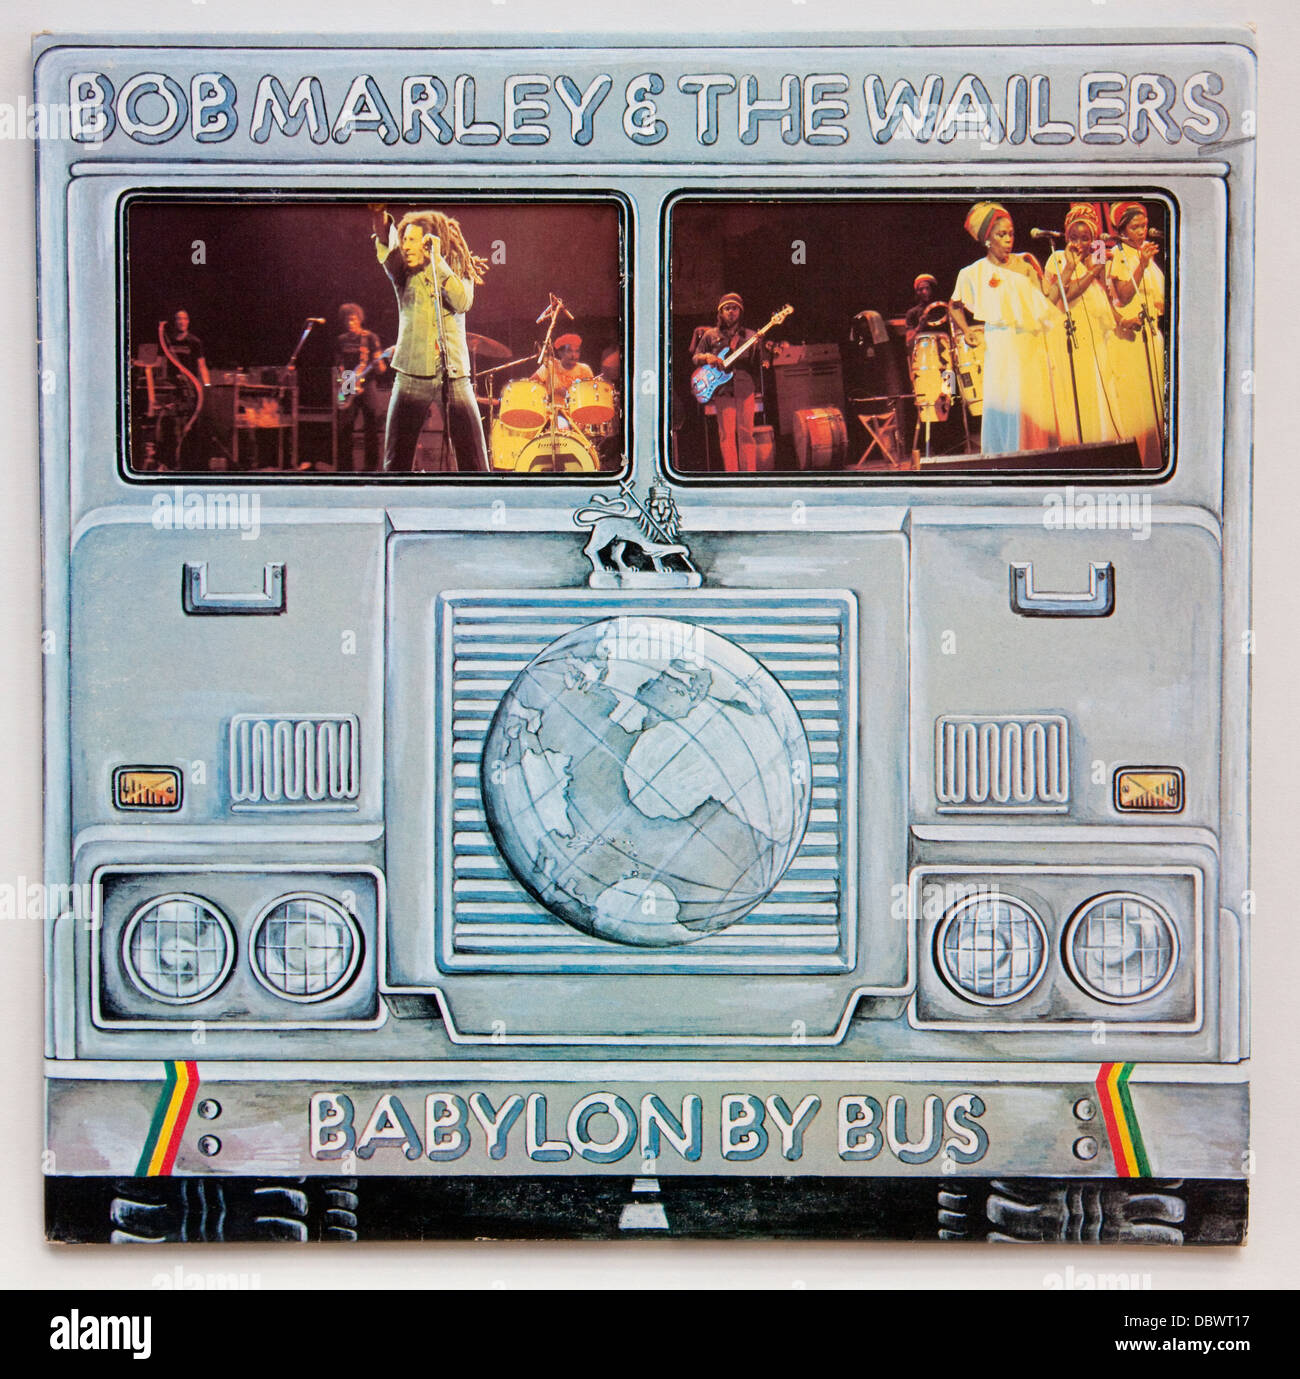 Bob Marley And The Wailers Babylon By Bus 1978 Live Album On Island Records Editorial Use Only Stock Photo Alamy